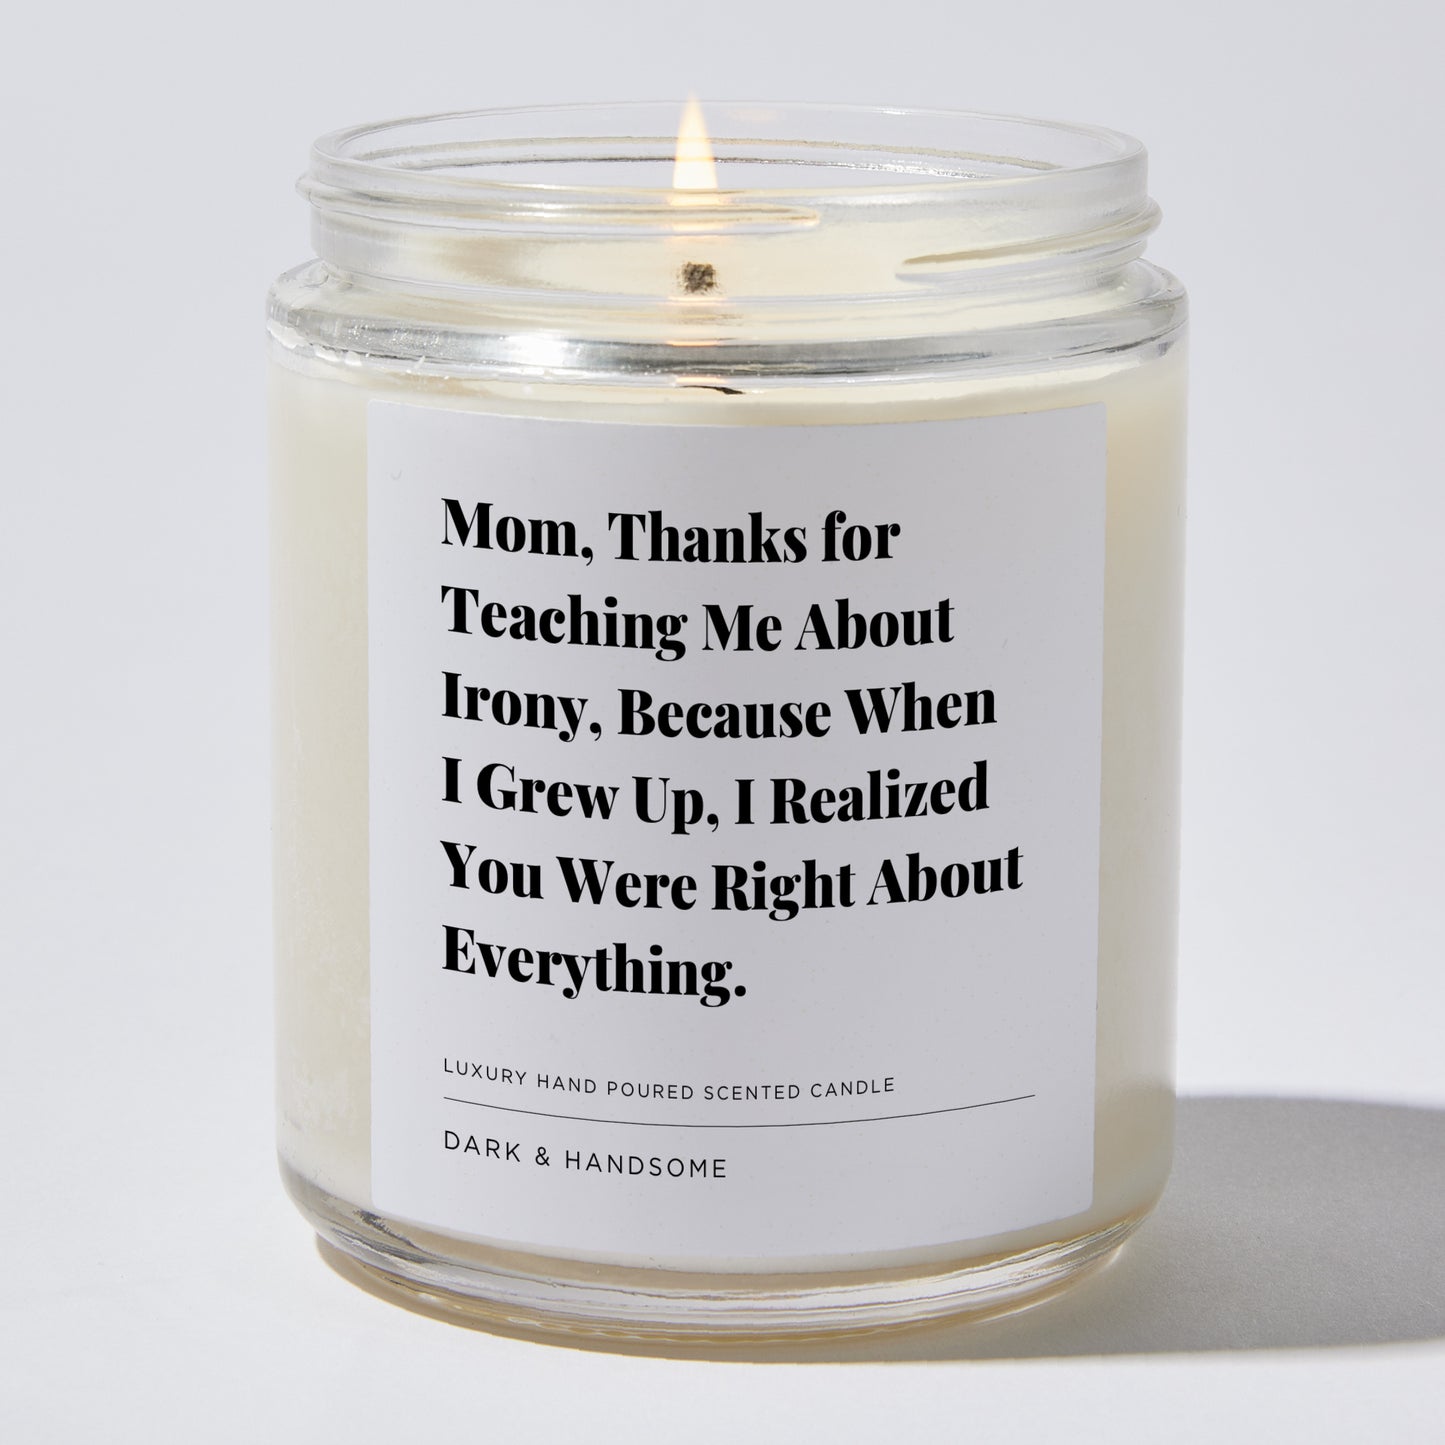 Gift for Mom - Mom, thanks for teaching me about irony, because when I grew up, I realized you were right about everything. - Candle